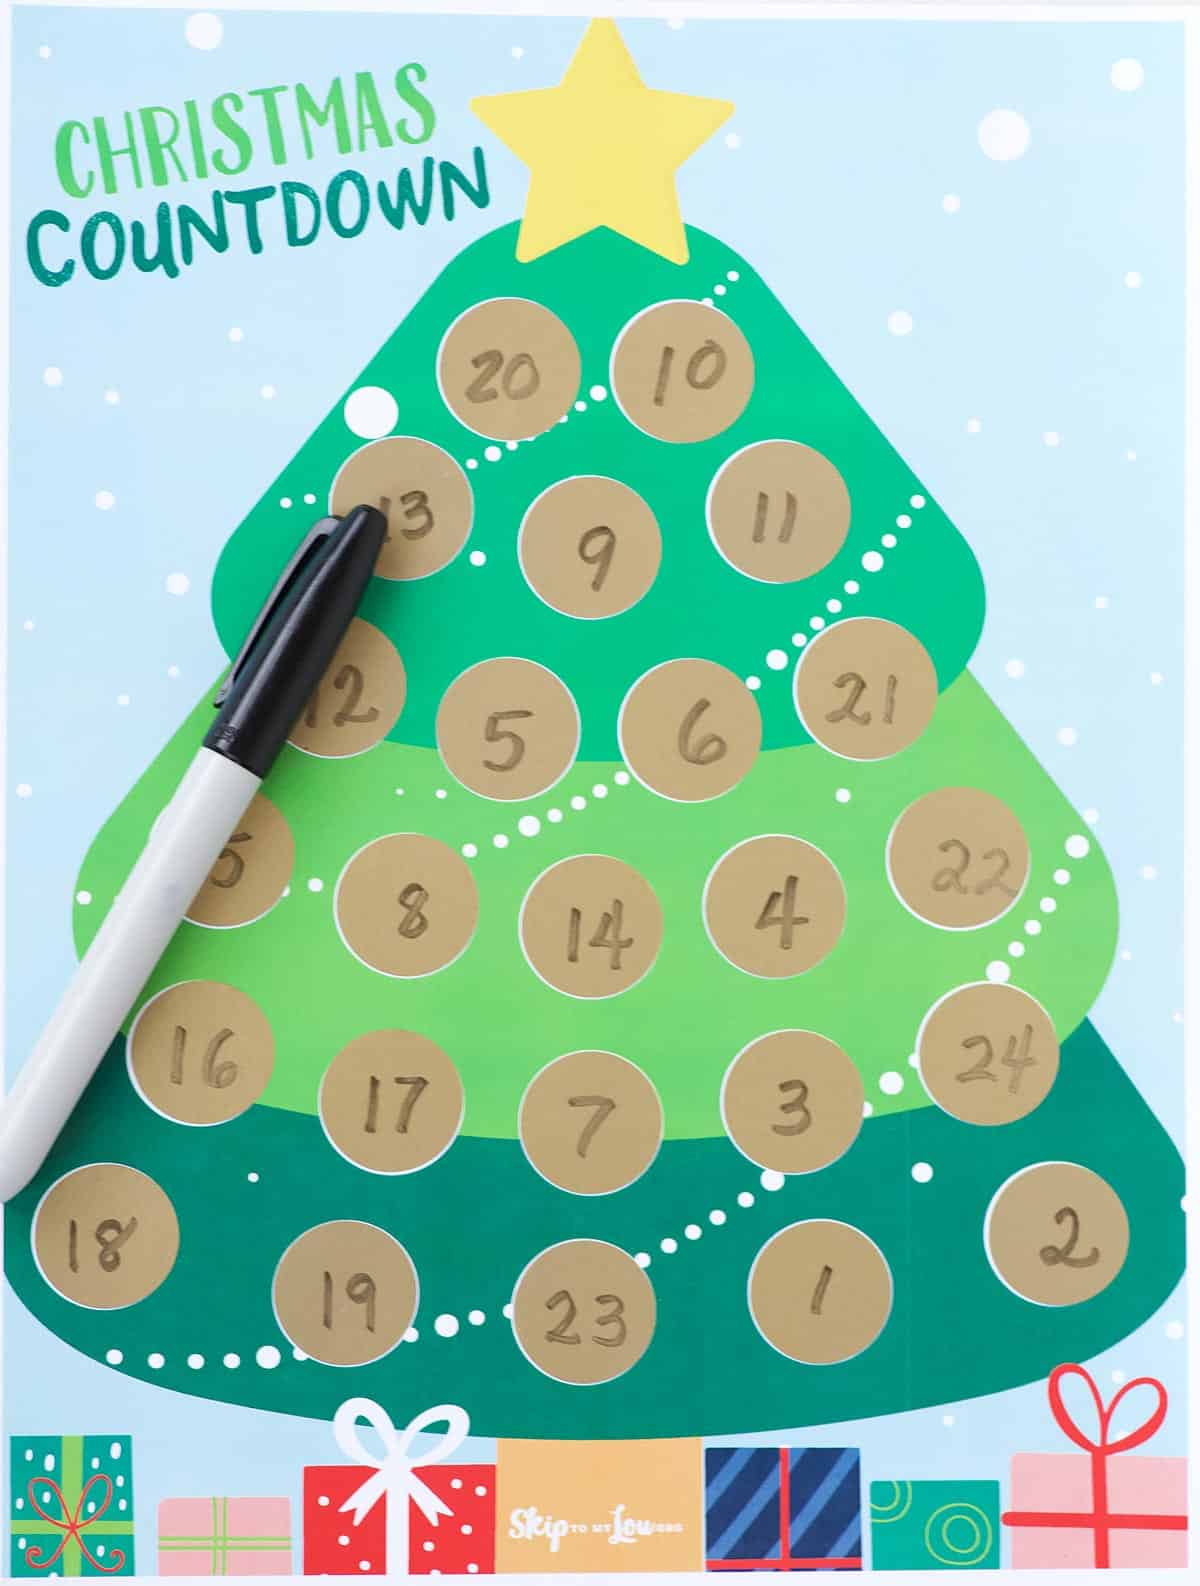 number scratch off stickers for Christmas countdown